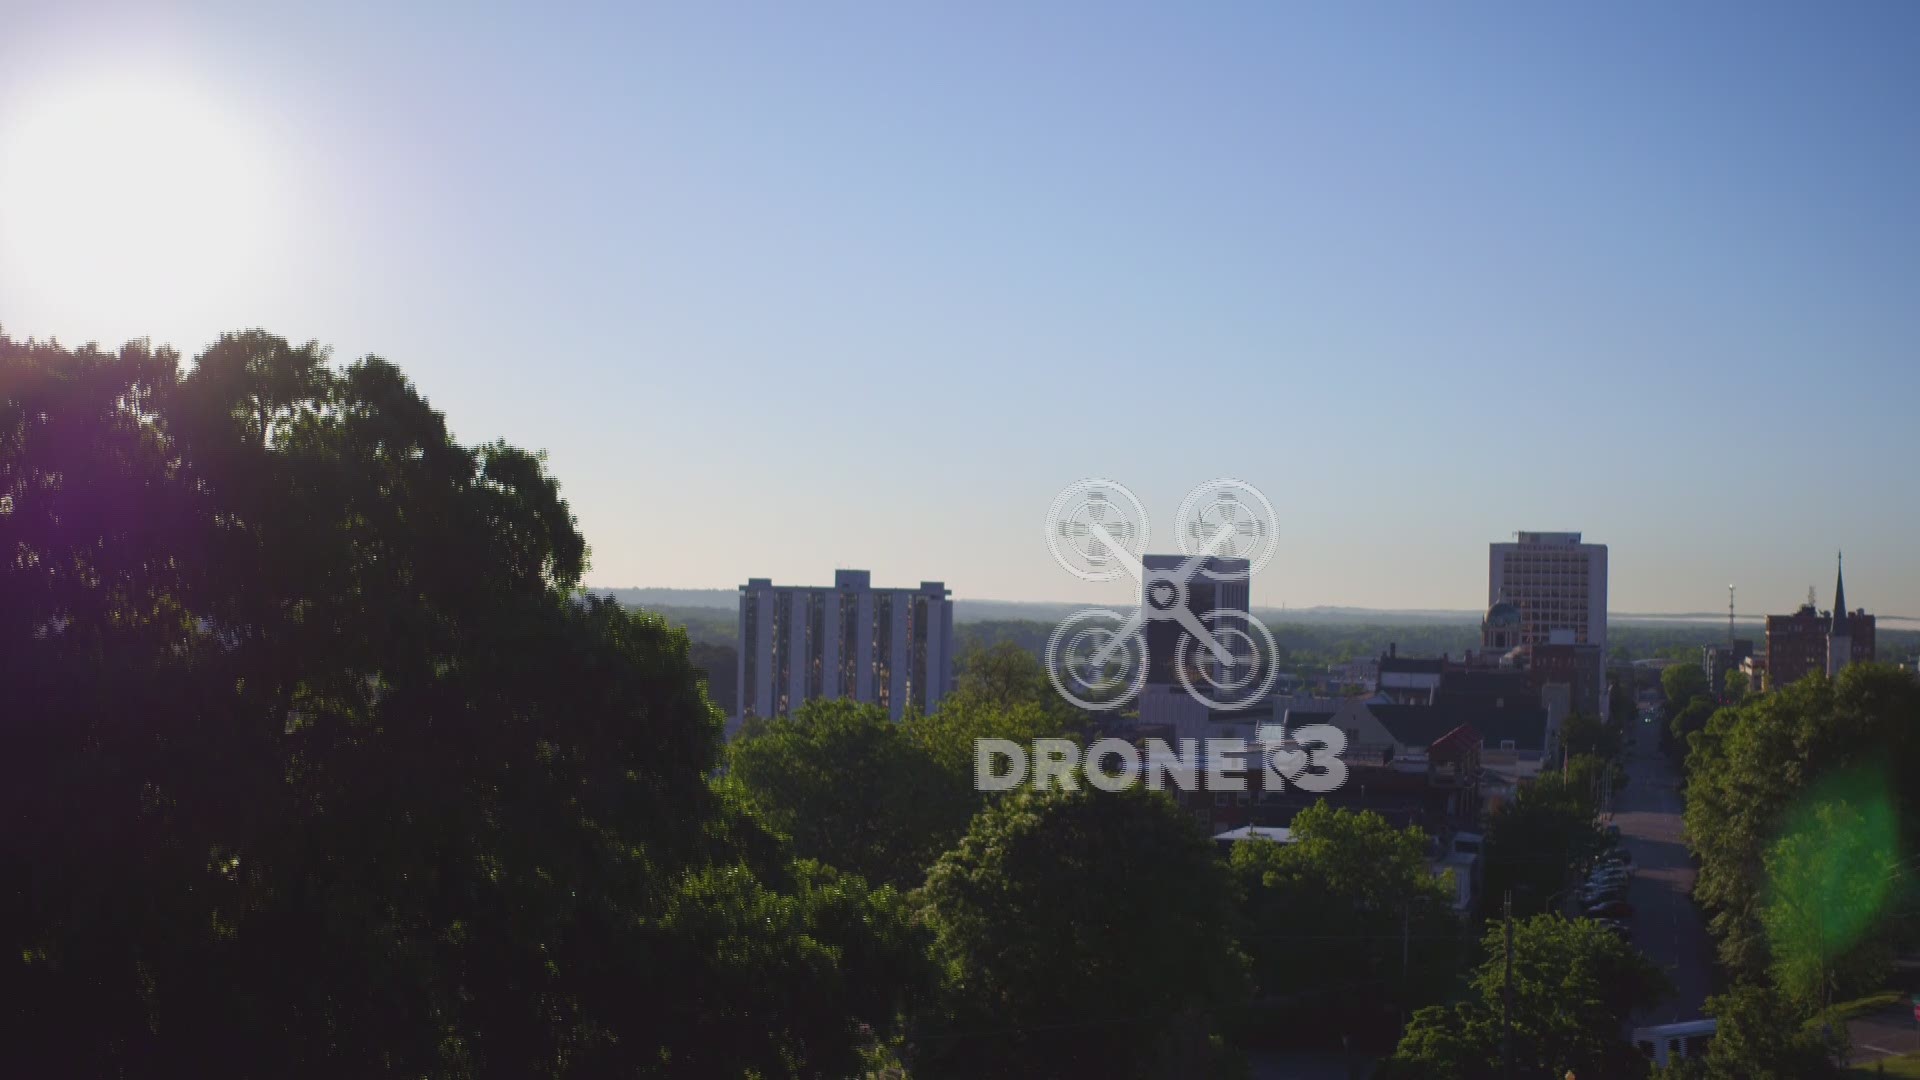 Macon's Coleman Hill offers spectacular views of downtown and out over the river valley east of the city. Those views are even more amazing when we launched #Drone13 from one of Macon's most scenic spots.